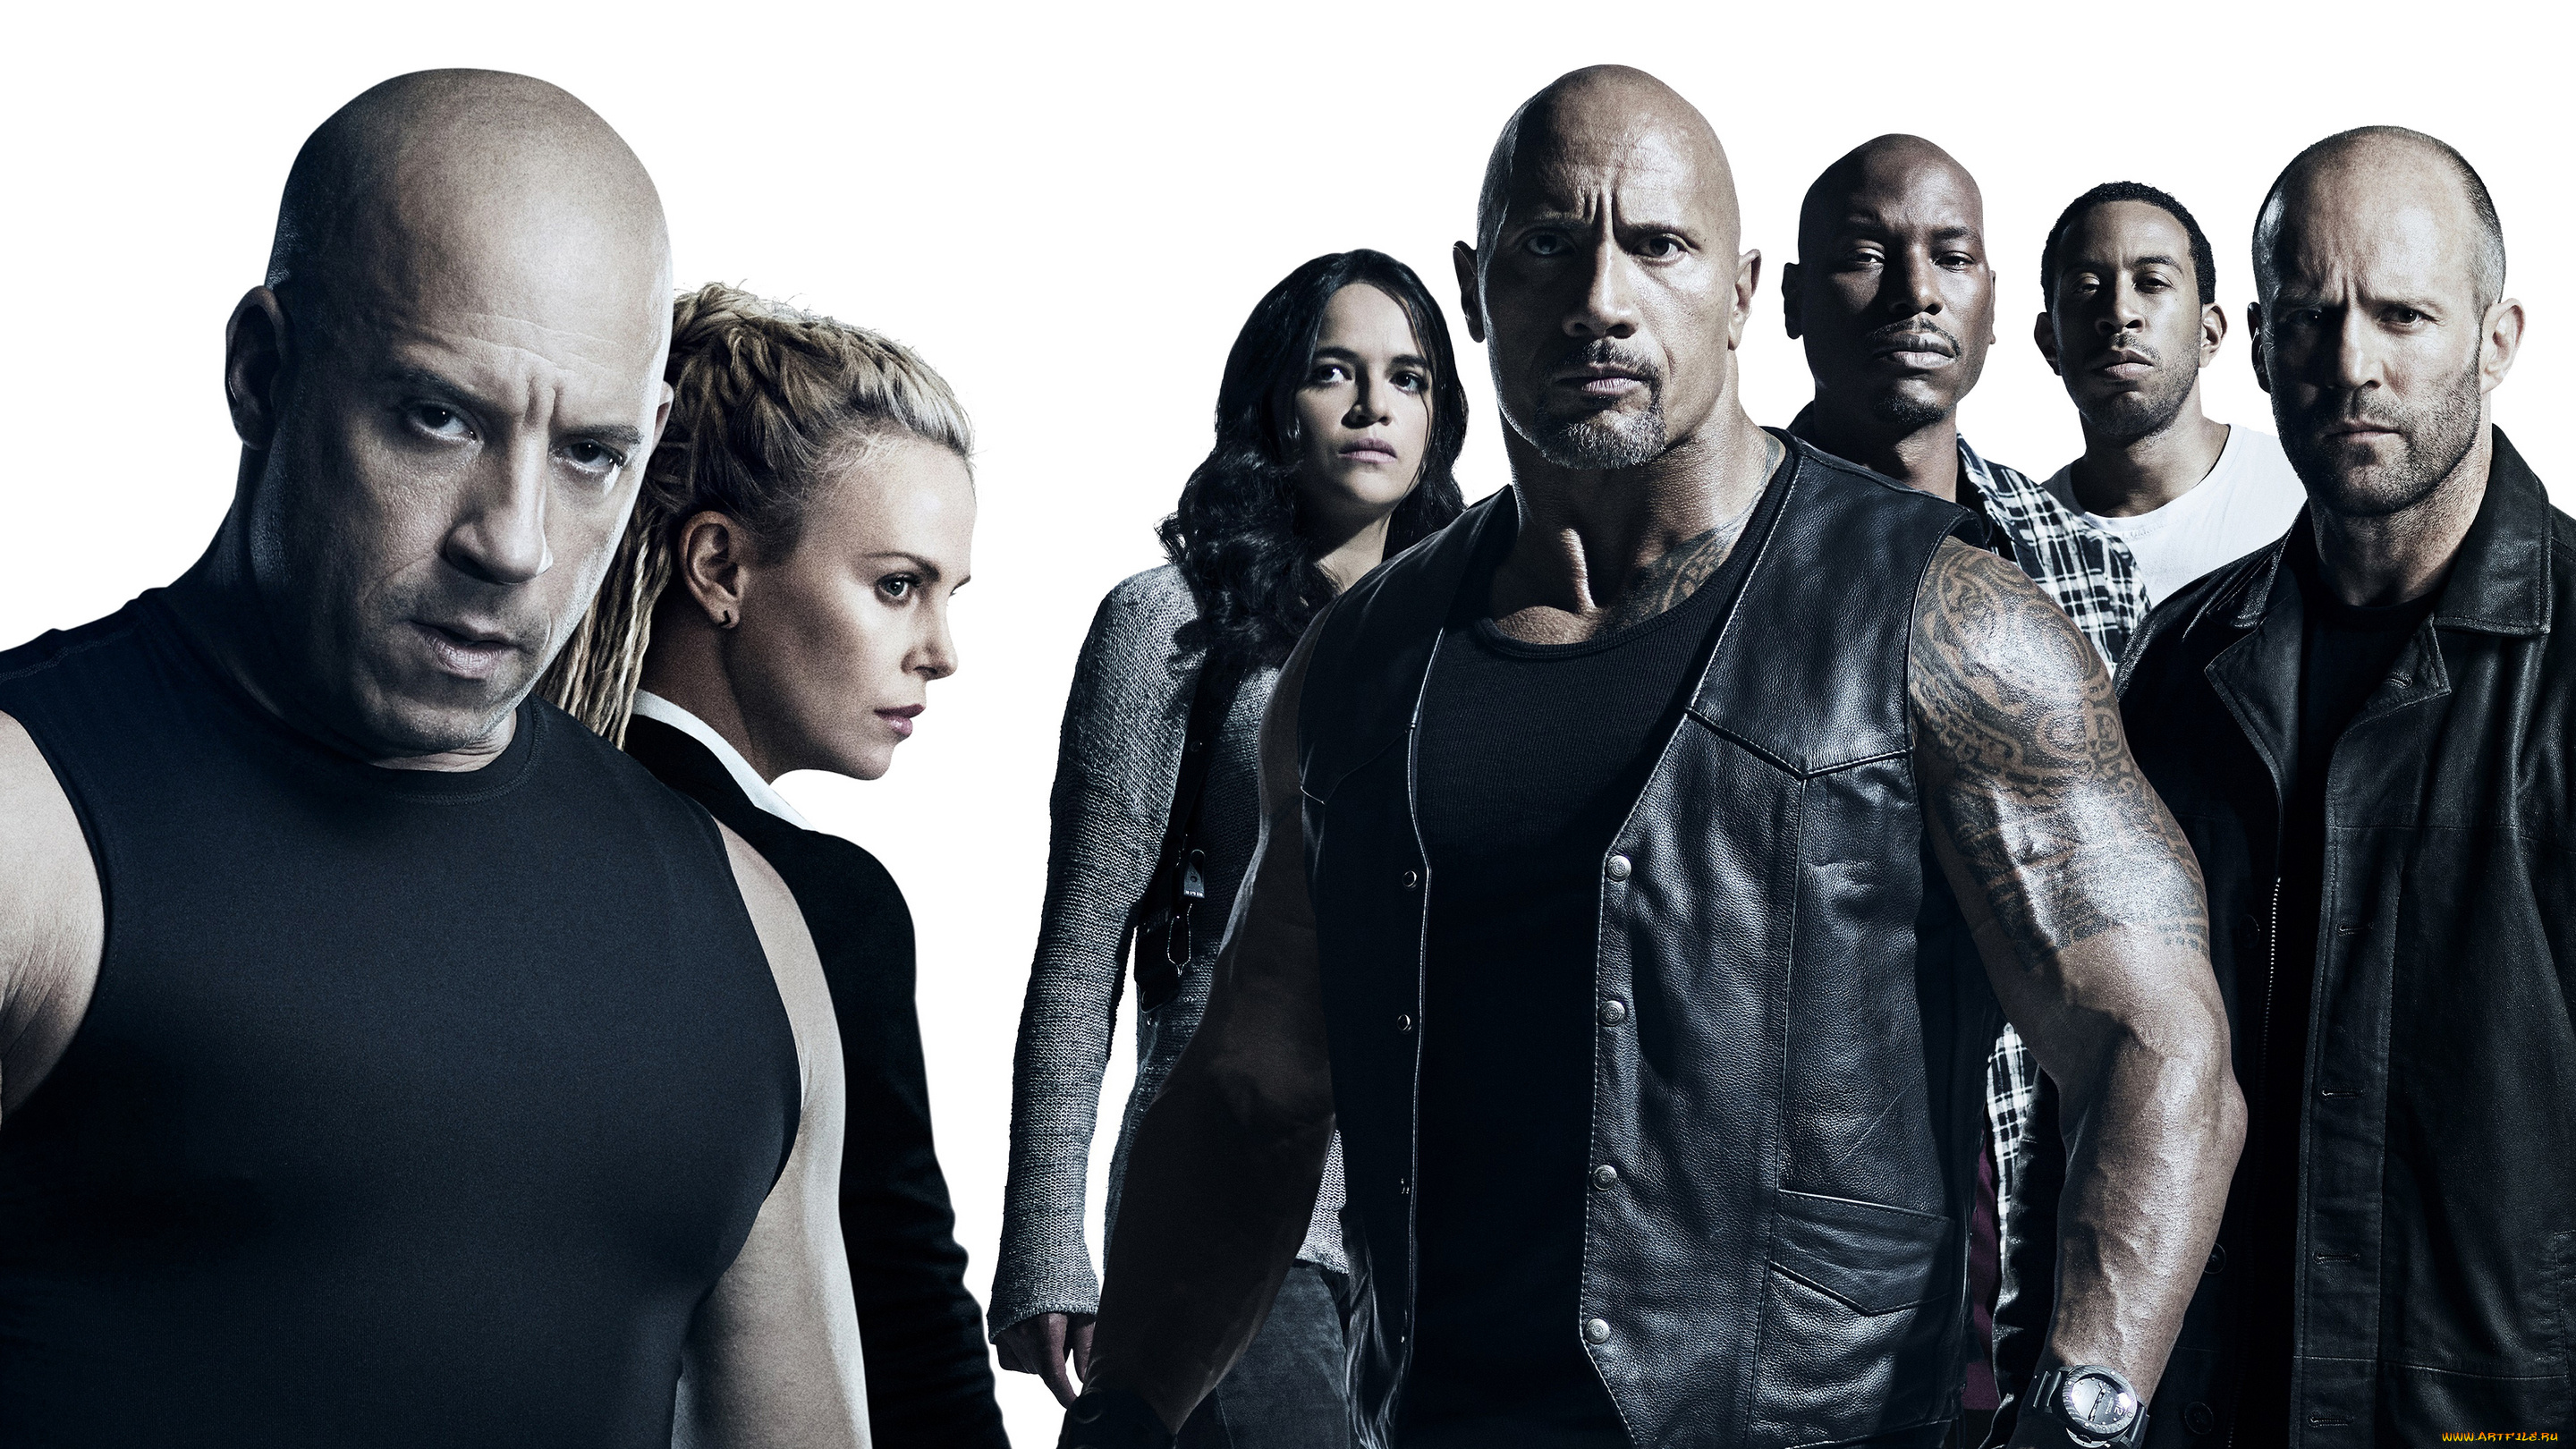 the, fate, of, the, furious, 8, кино, фильмы, the, fate, of, the, furious, action, боевик, the, fate, of, furious, 8, форсаж